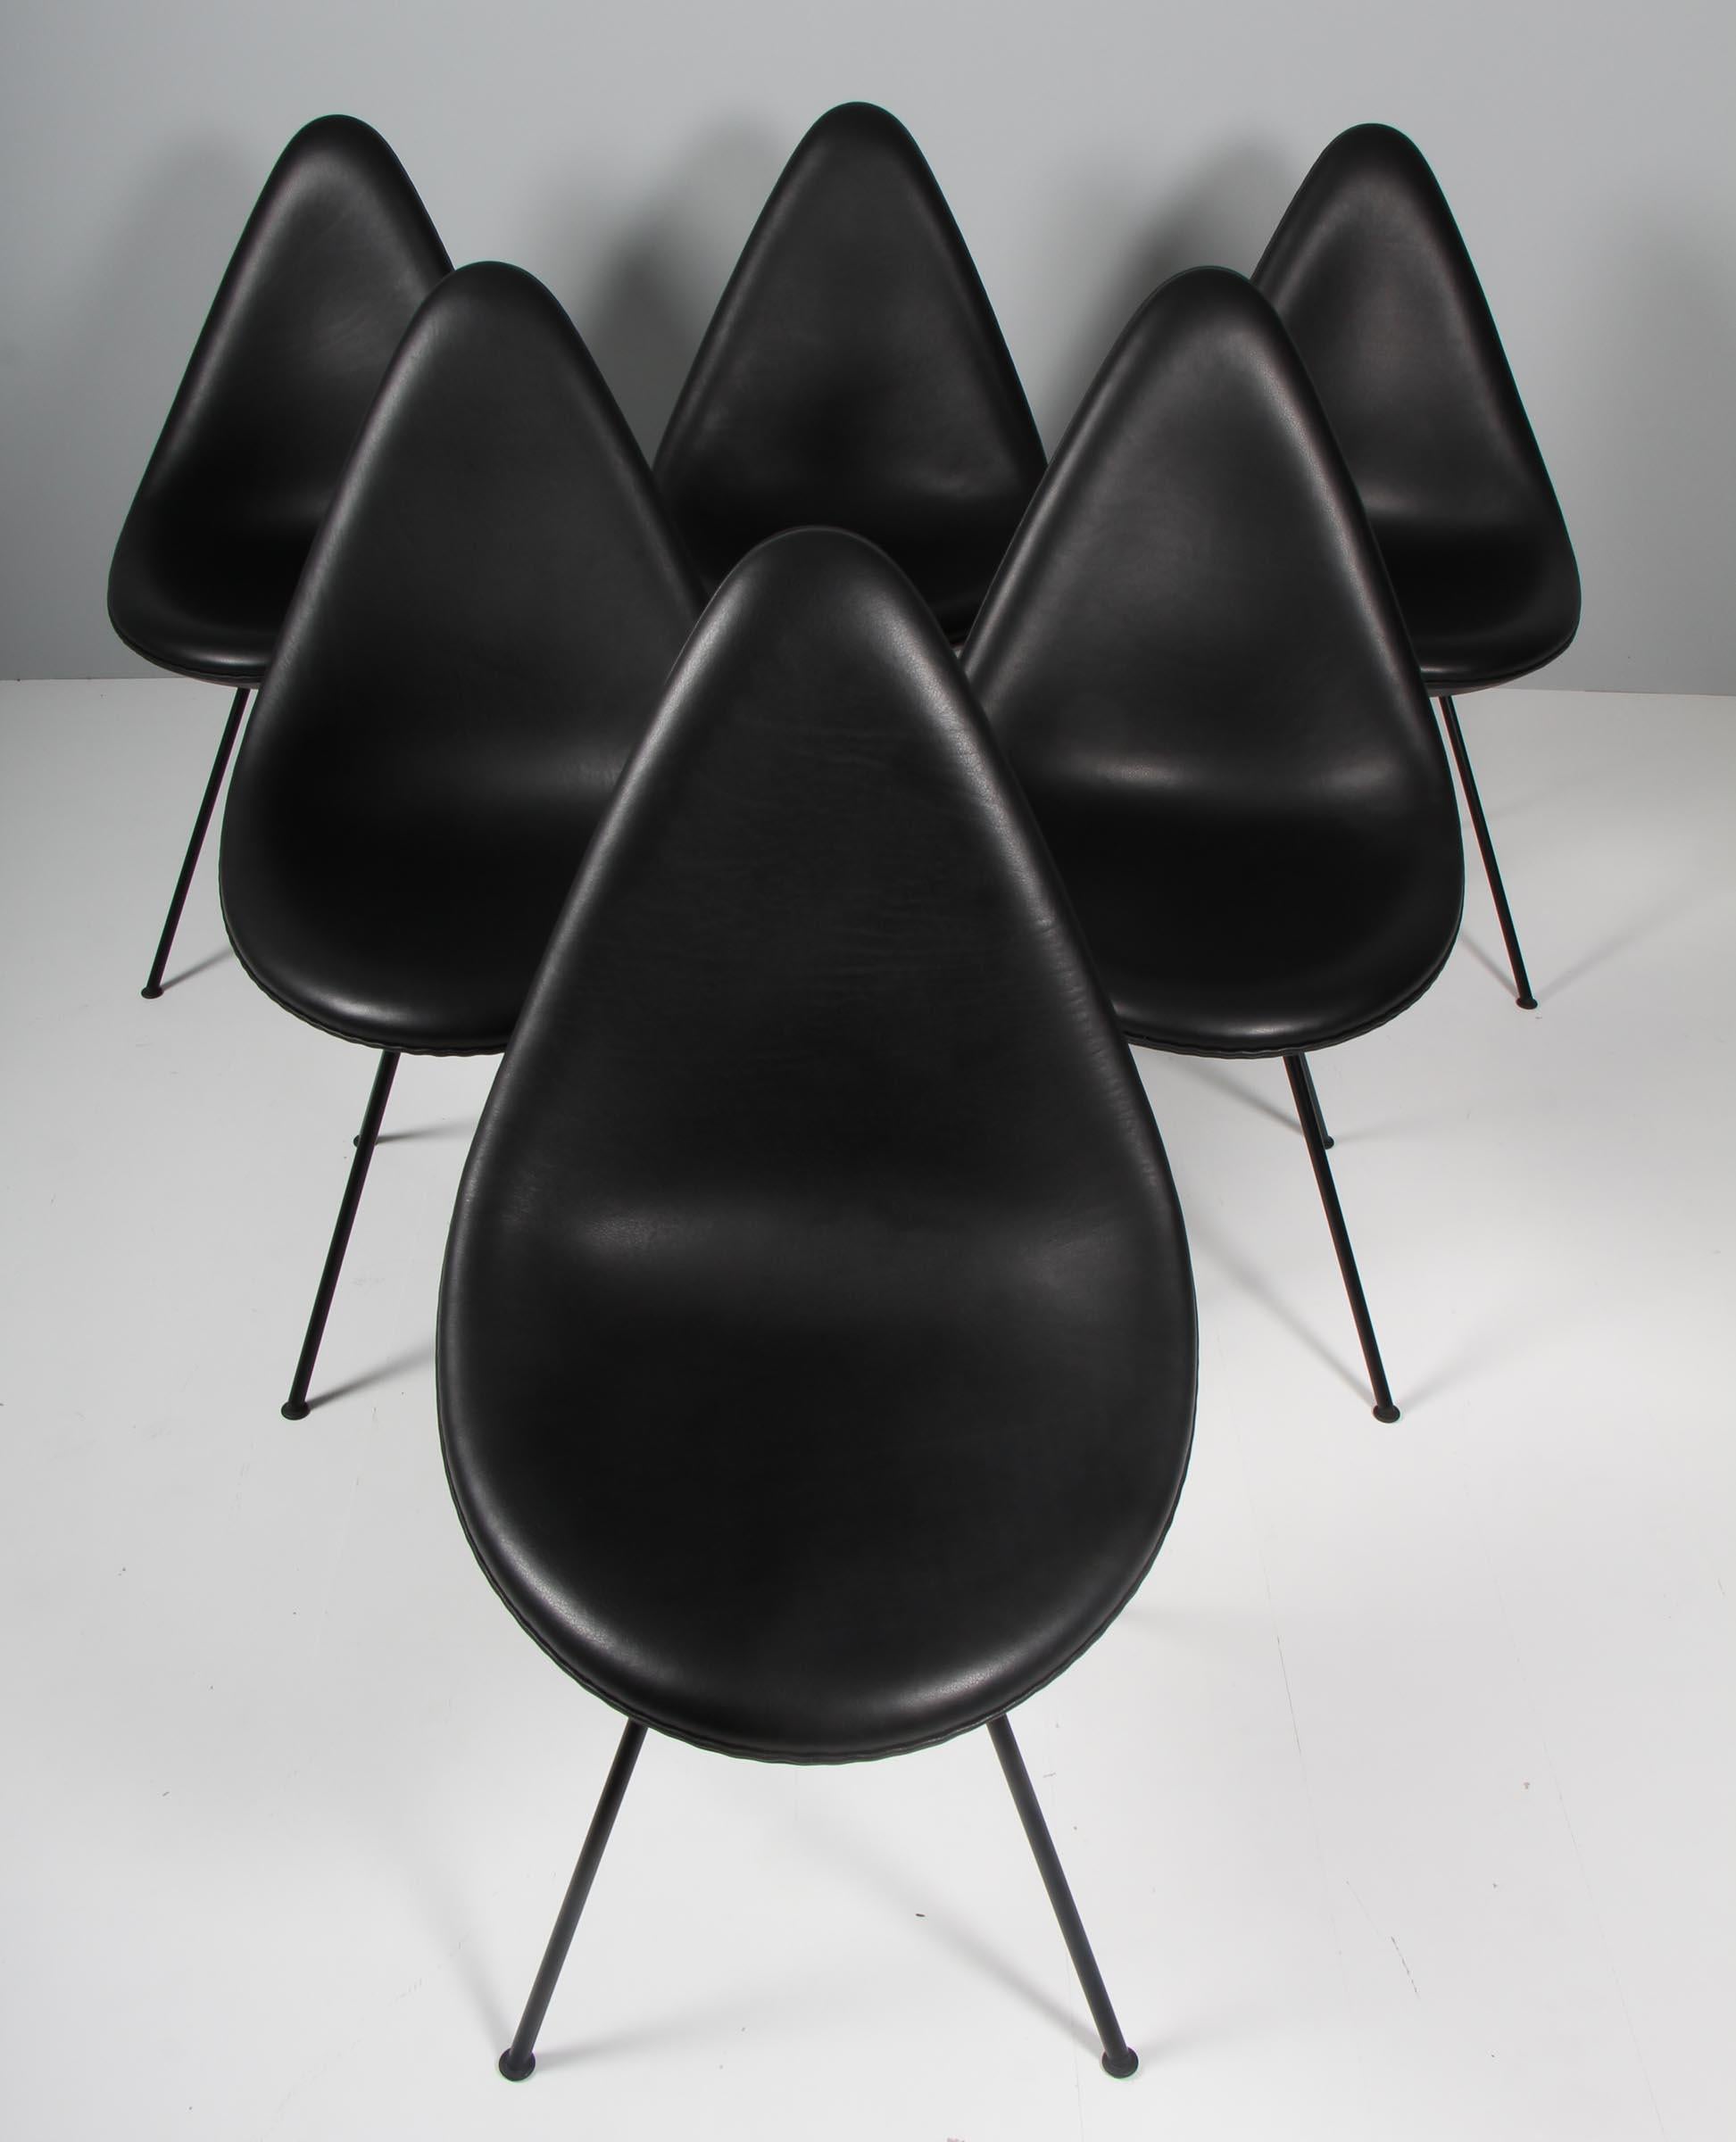 Arne Jacobsen dining chairs, new upholstered with black aniline leather.

Legs of powder coated steel.

Model 3110 